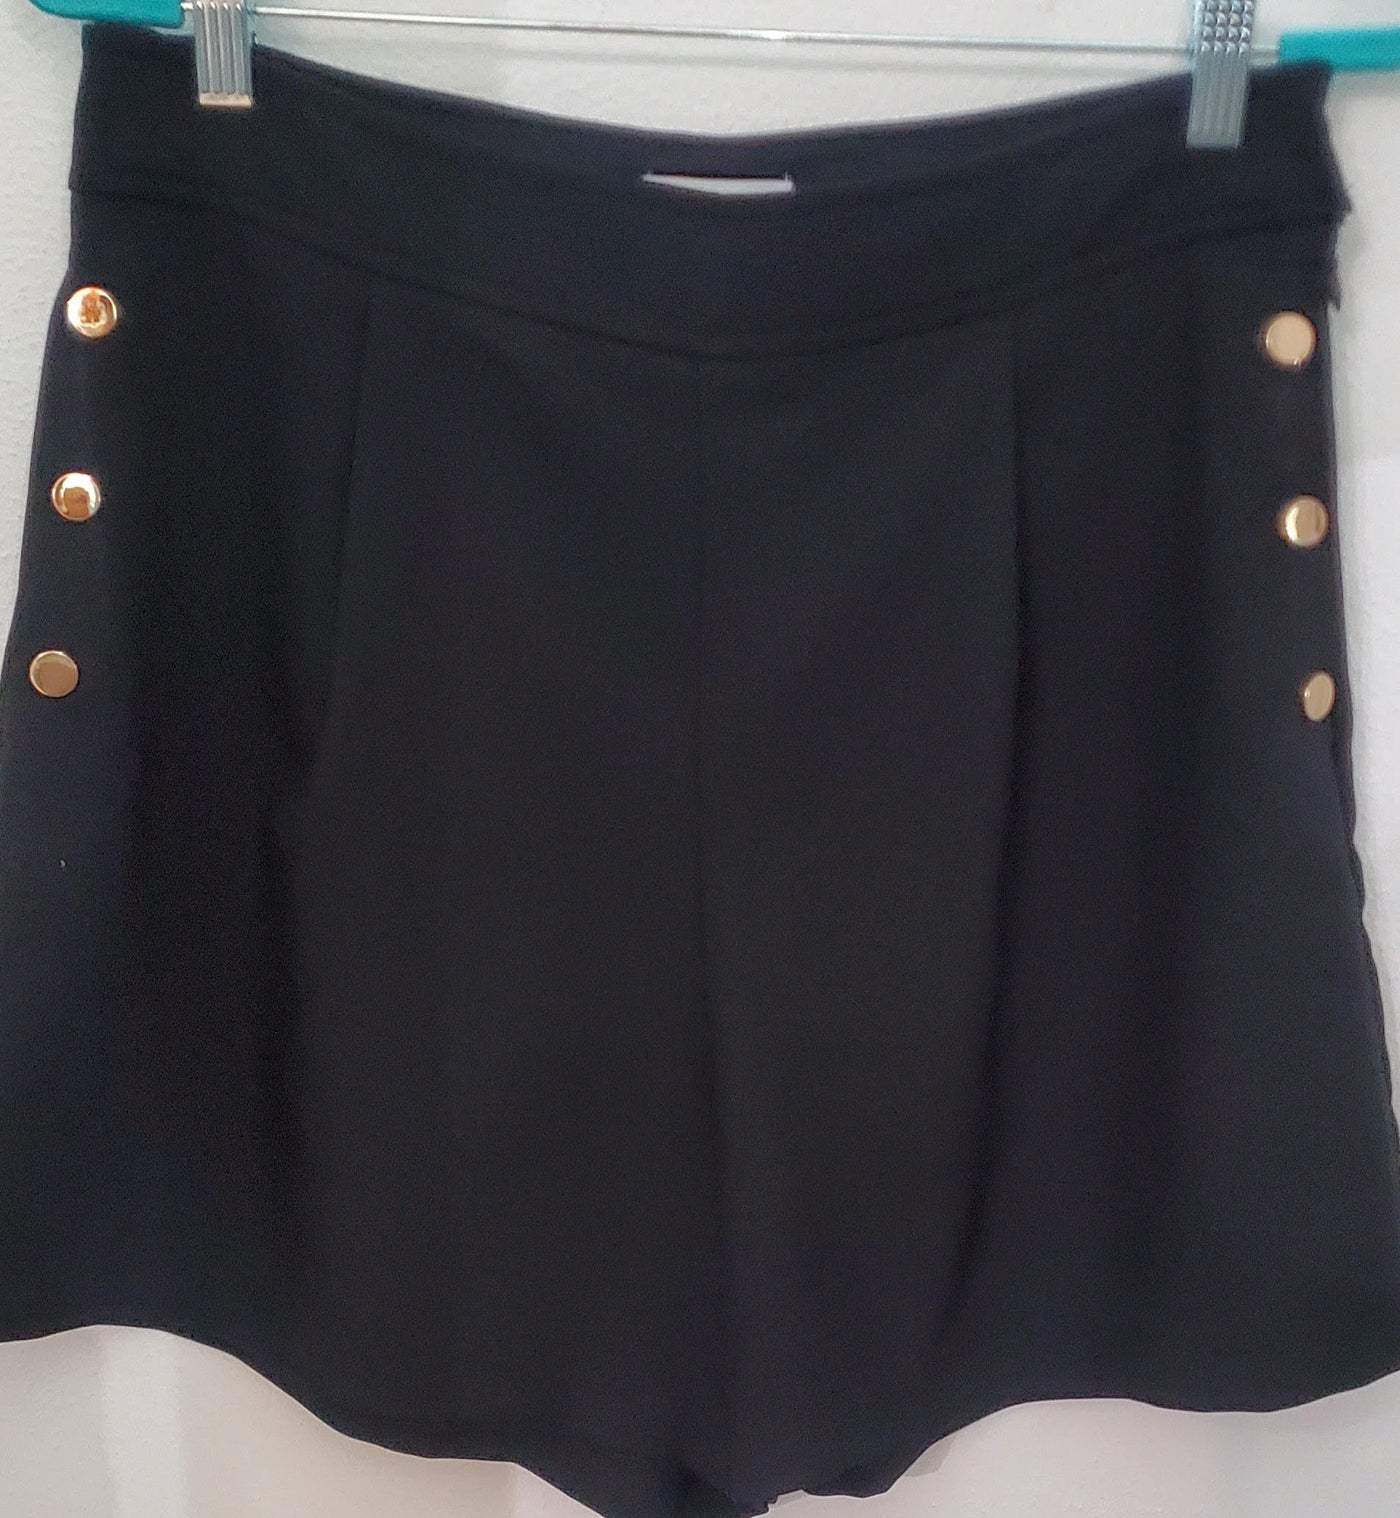 Black Stretch Short with Gold Button Detail